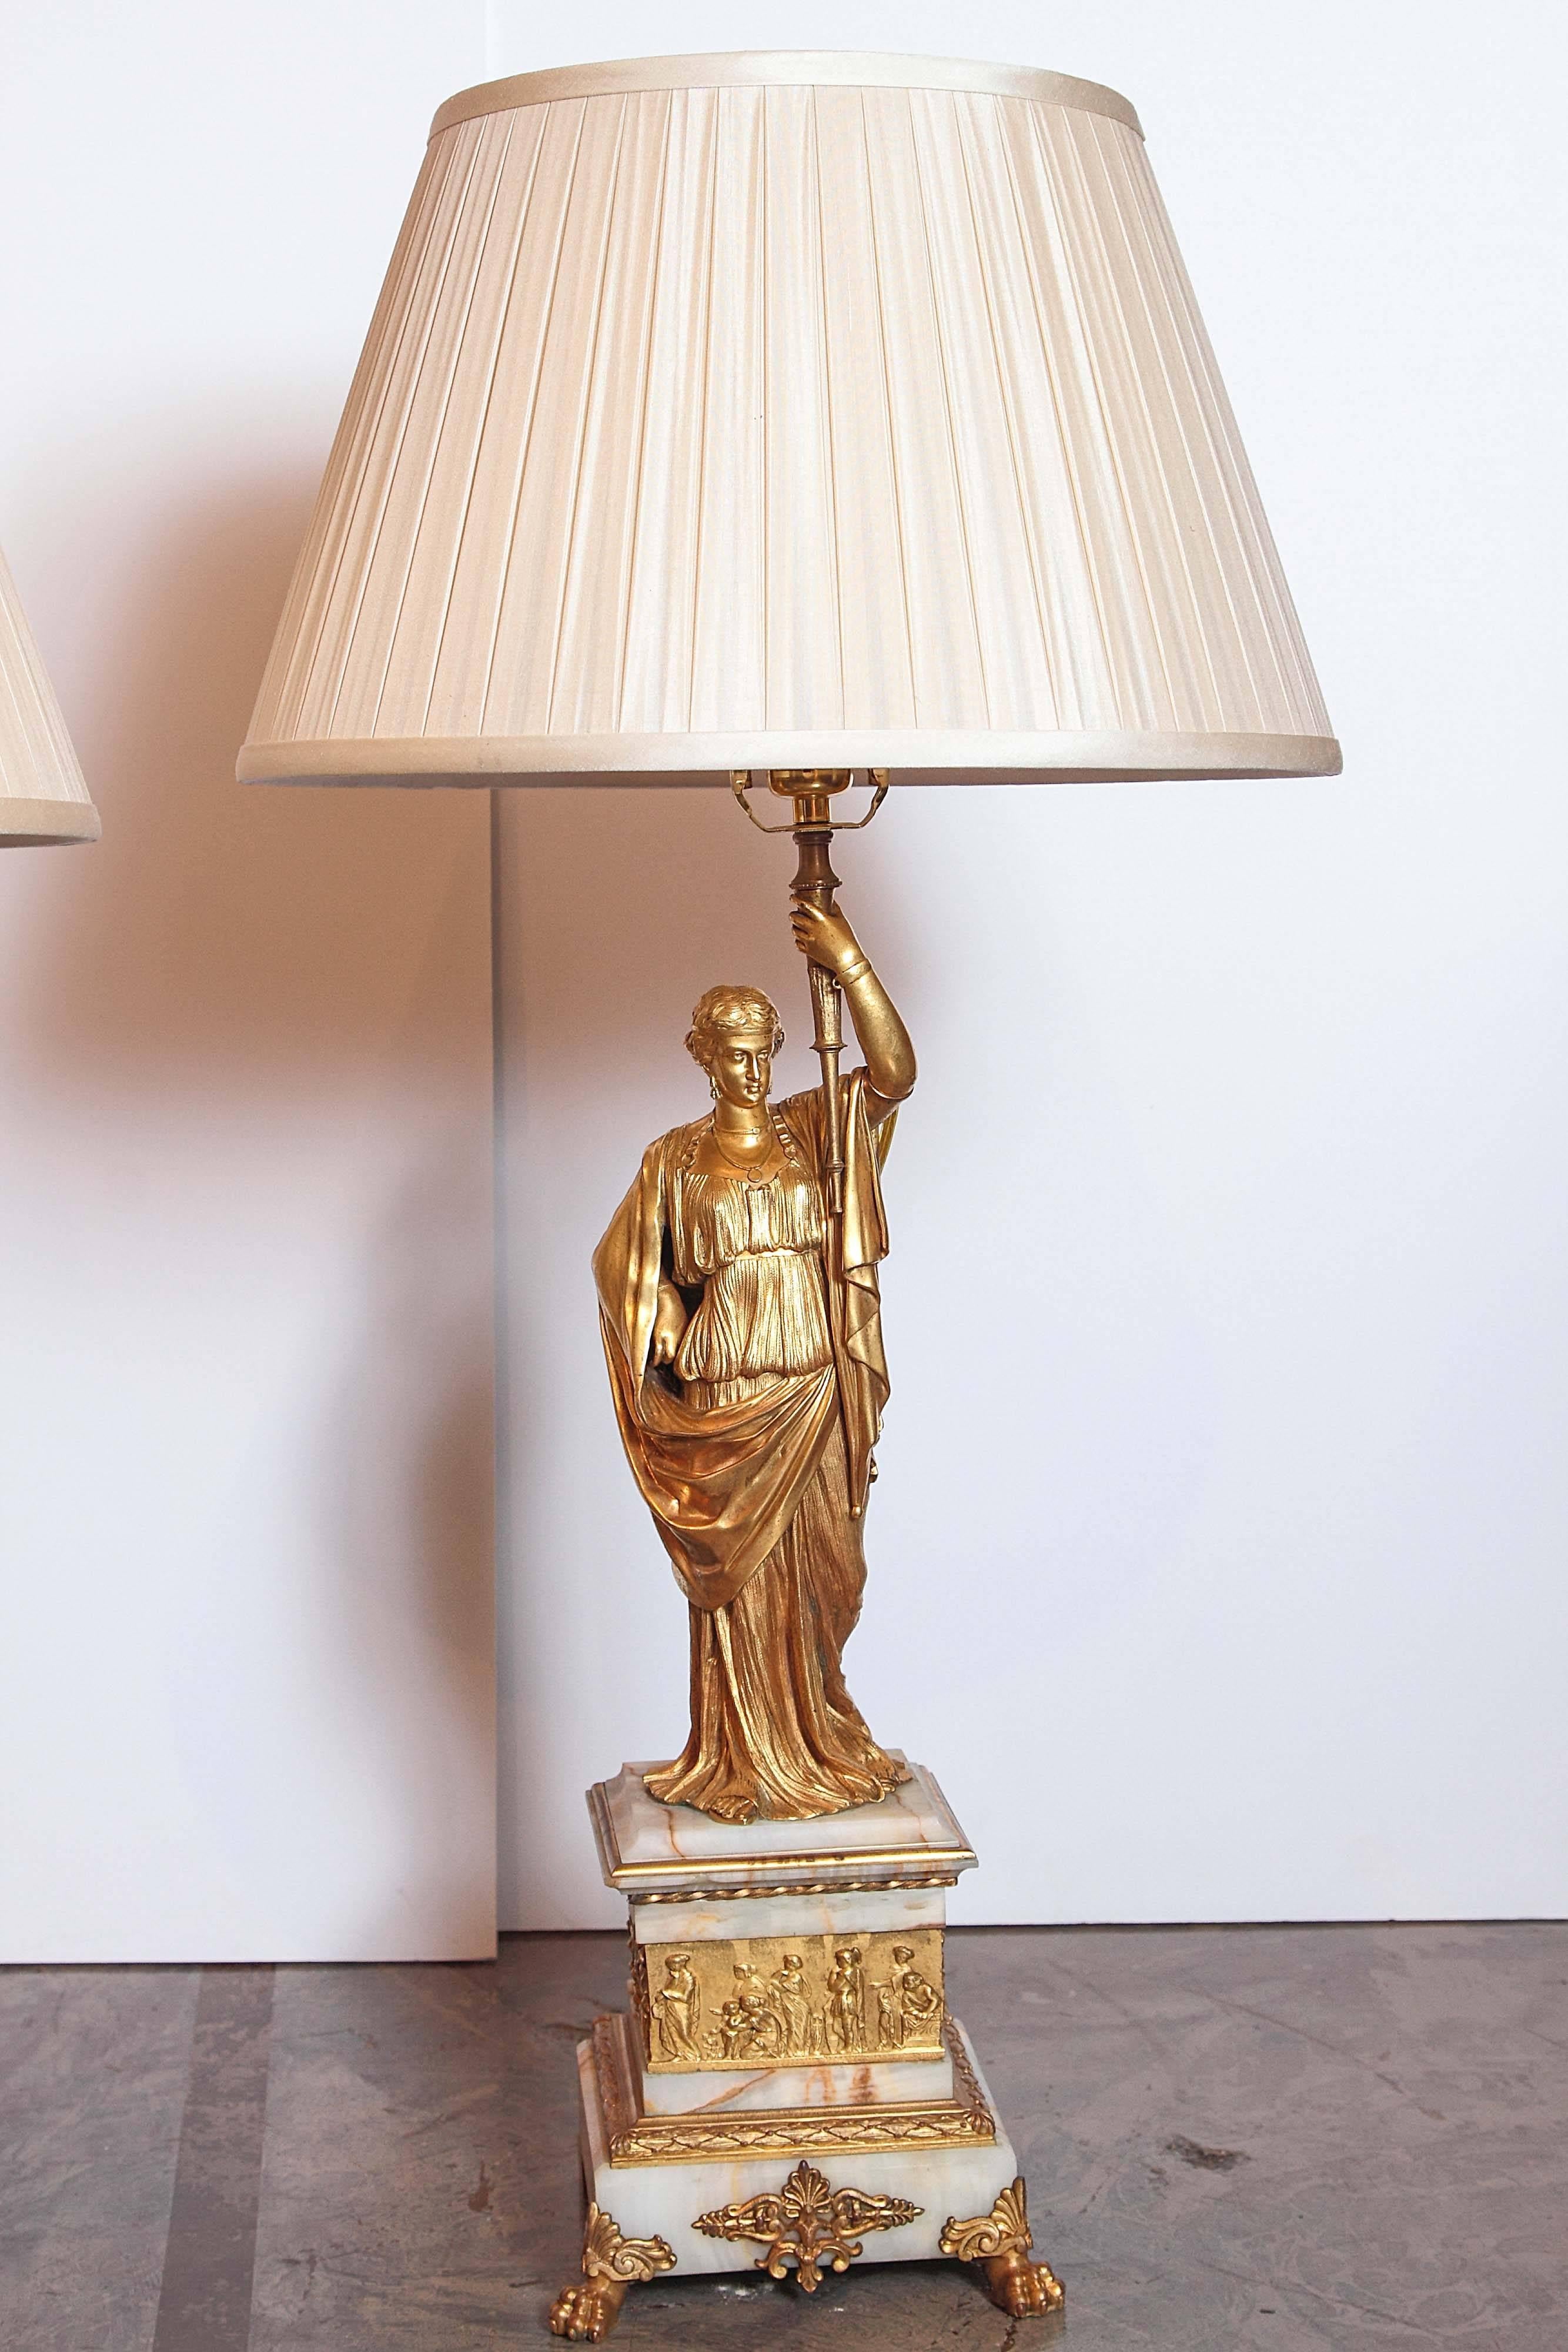 Empire Revival 19th Century Gilt Bronze and Alabaster Based Empire Classical Figural Lamps